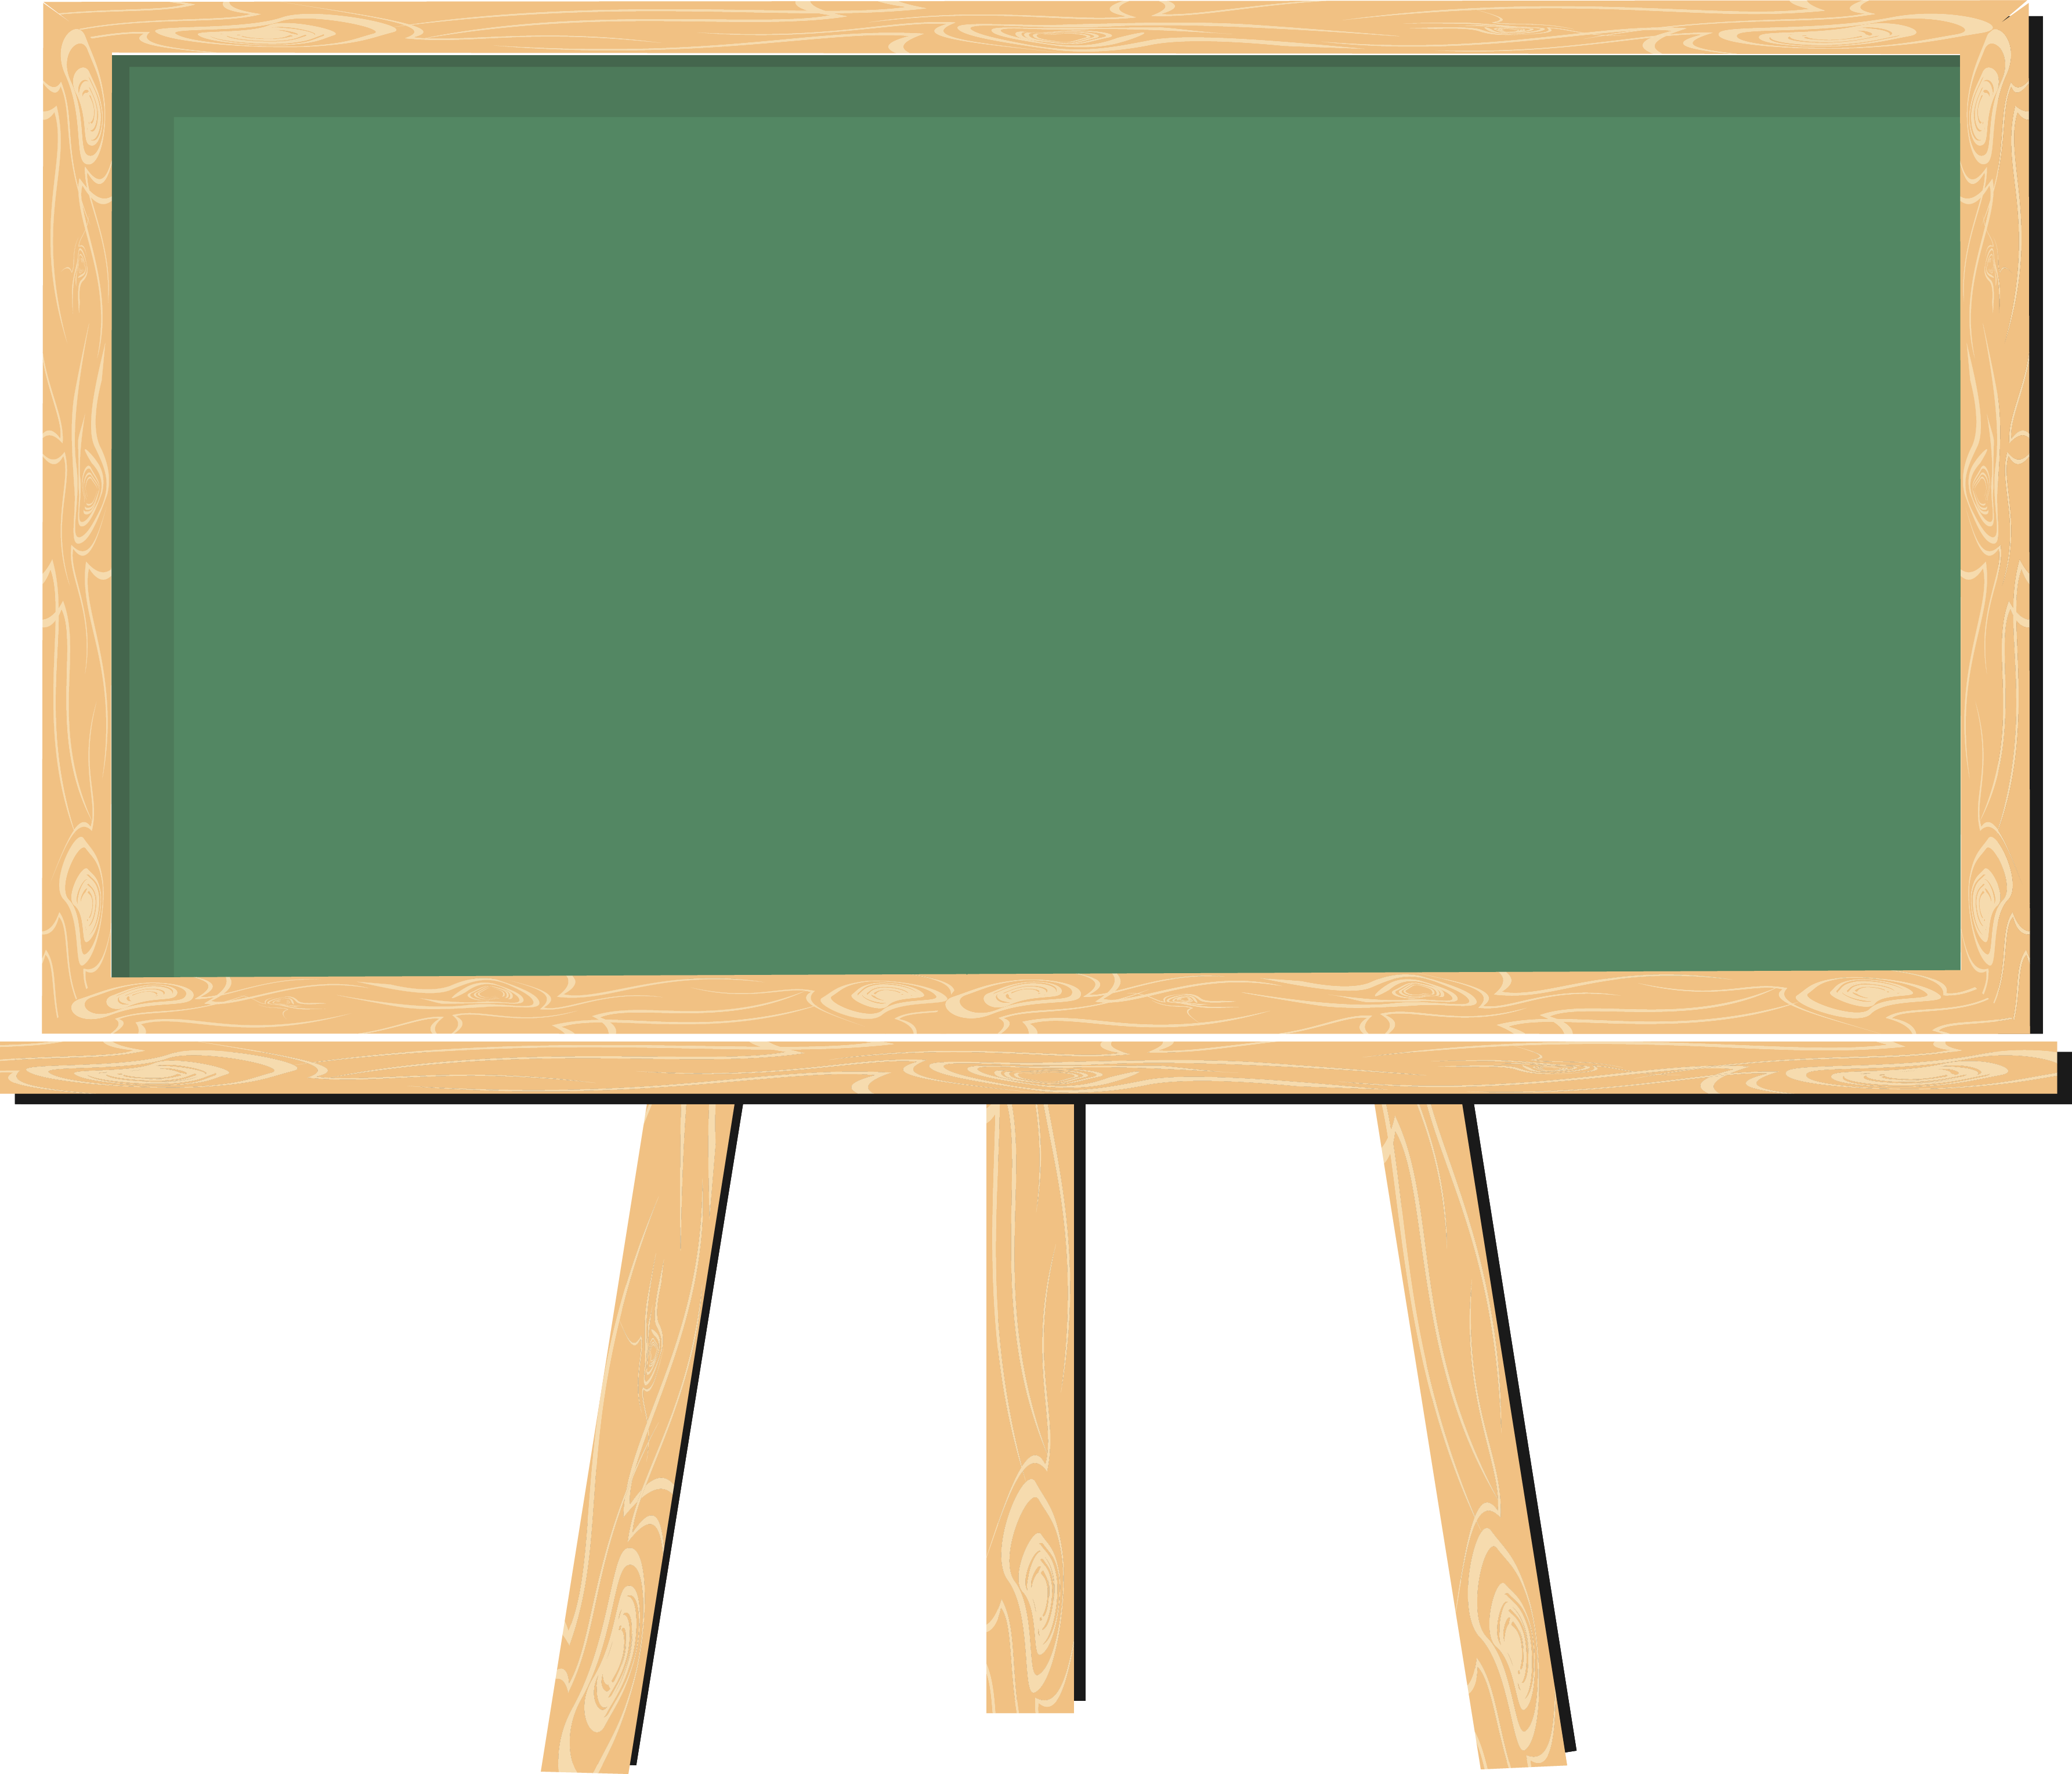 a green board with a wooden frame that is attached to the wall of the school classroom to write and explain on it 538